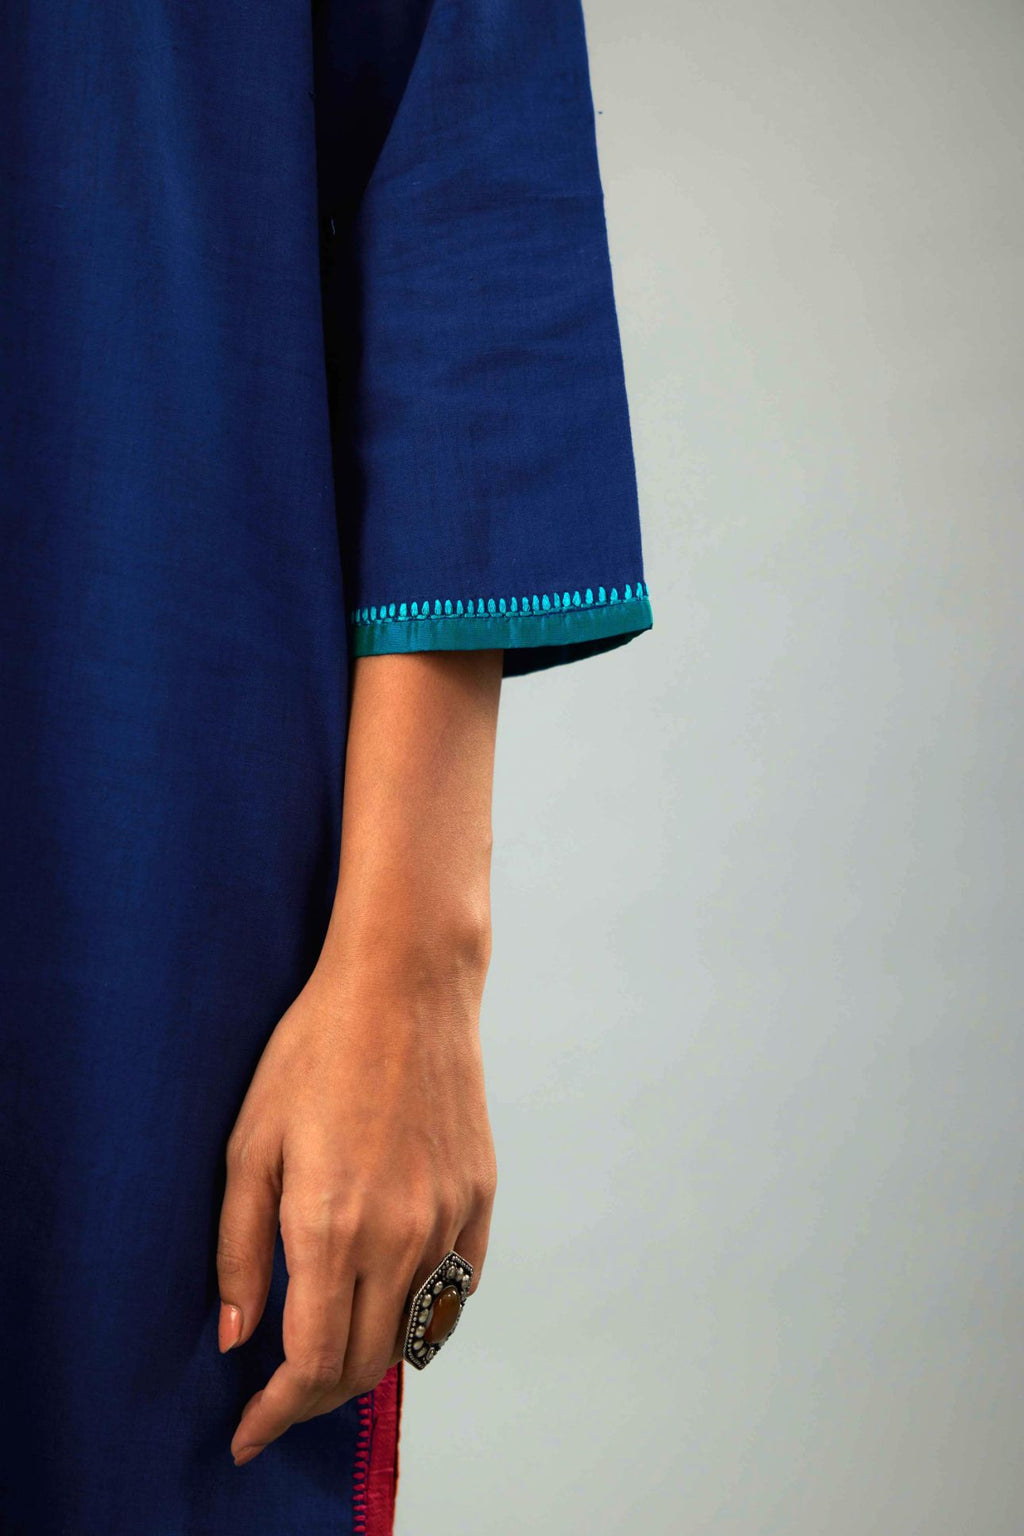 Blue handloom cotton straight kurta set with multi colored silk facings and embroidery detail.